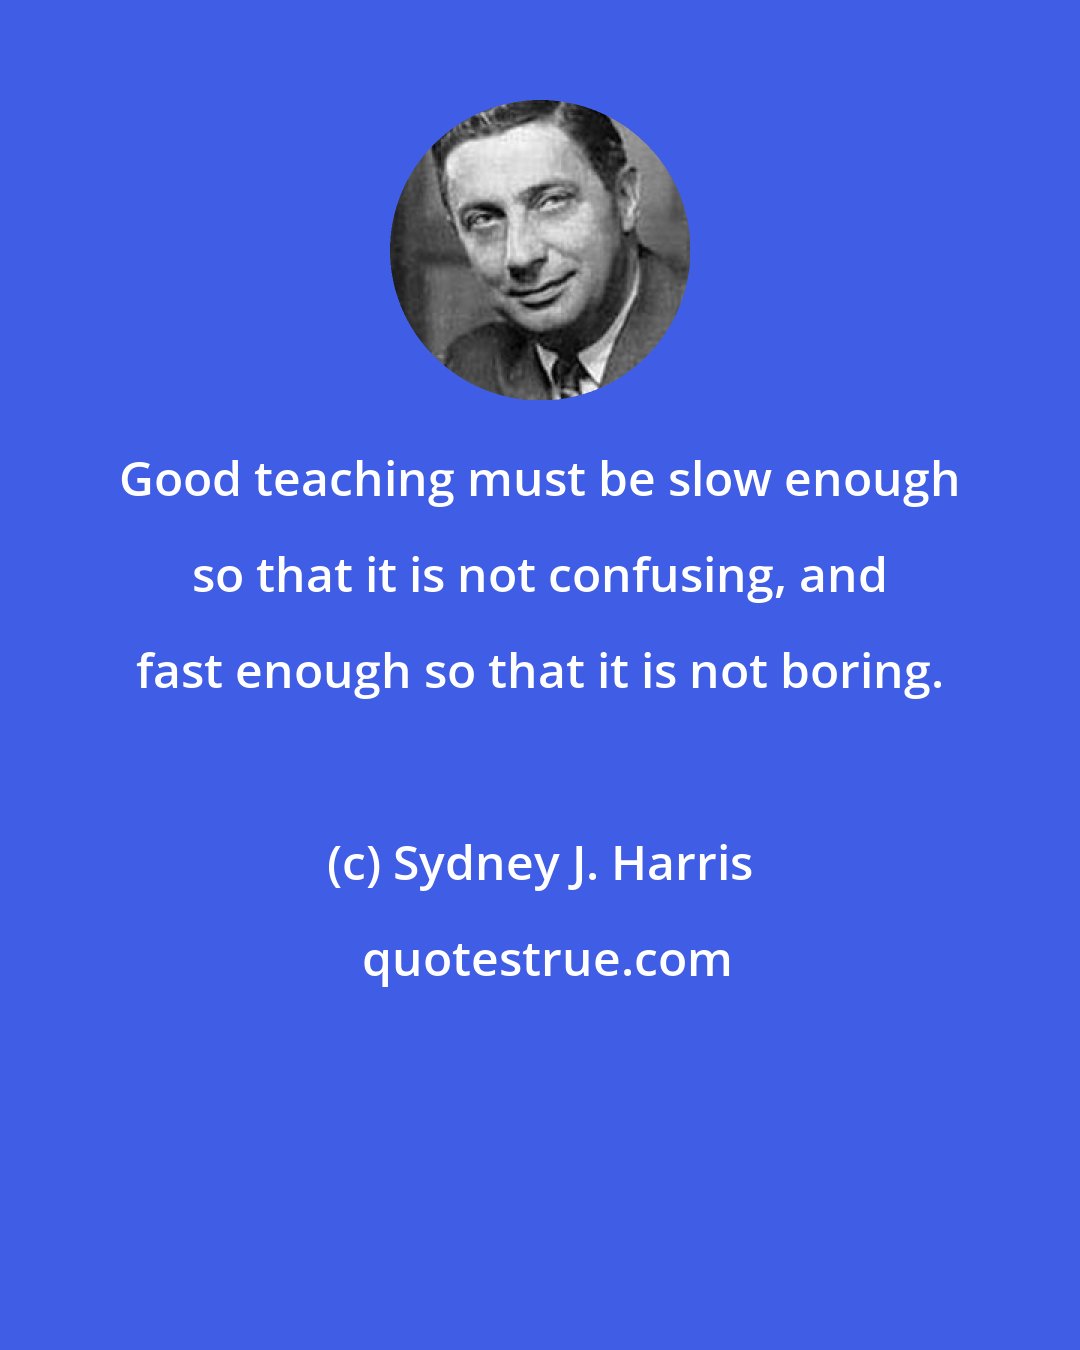 Sydney J. Harris: Good teaching must be slow enough so that it is not confusing, and fast enough so that it is not boring.